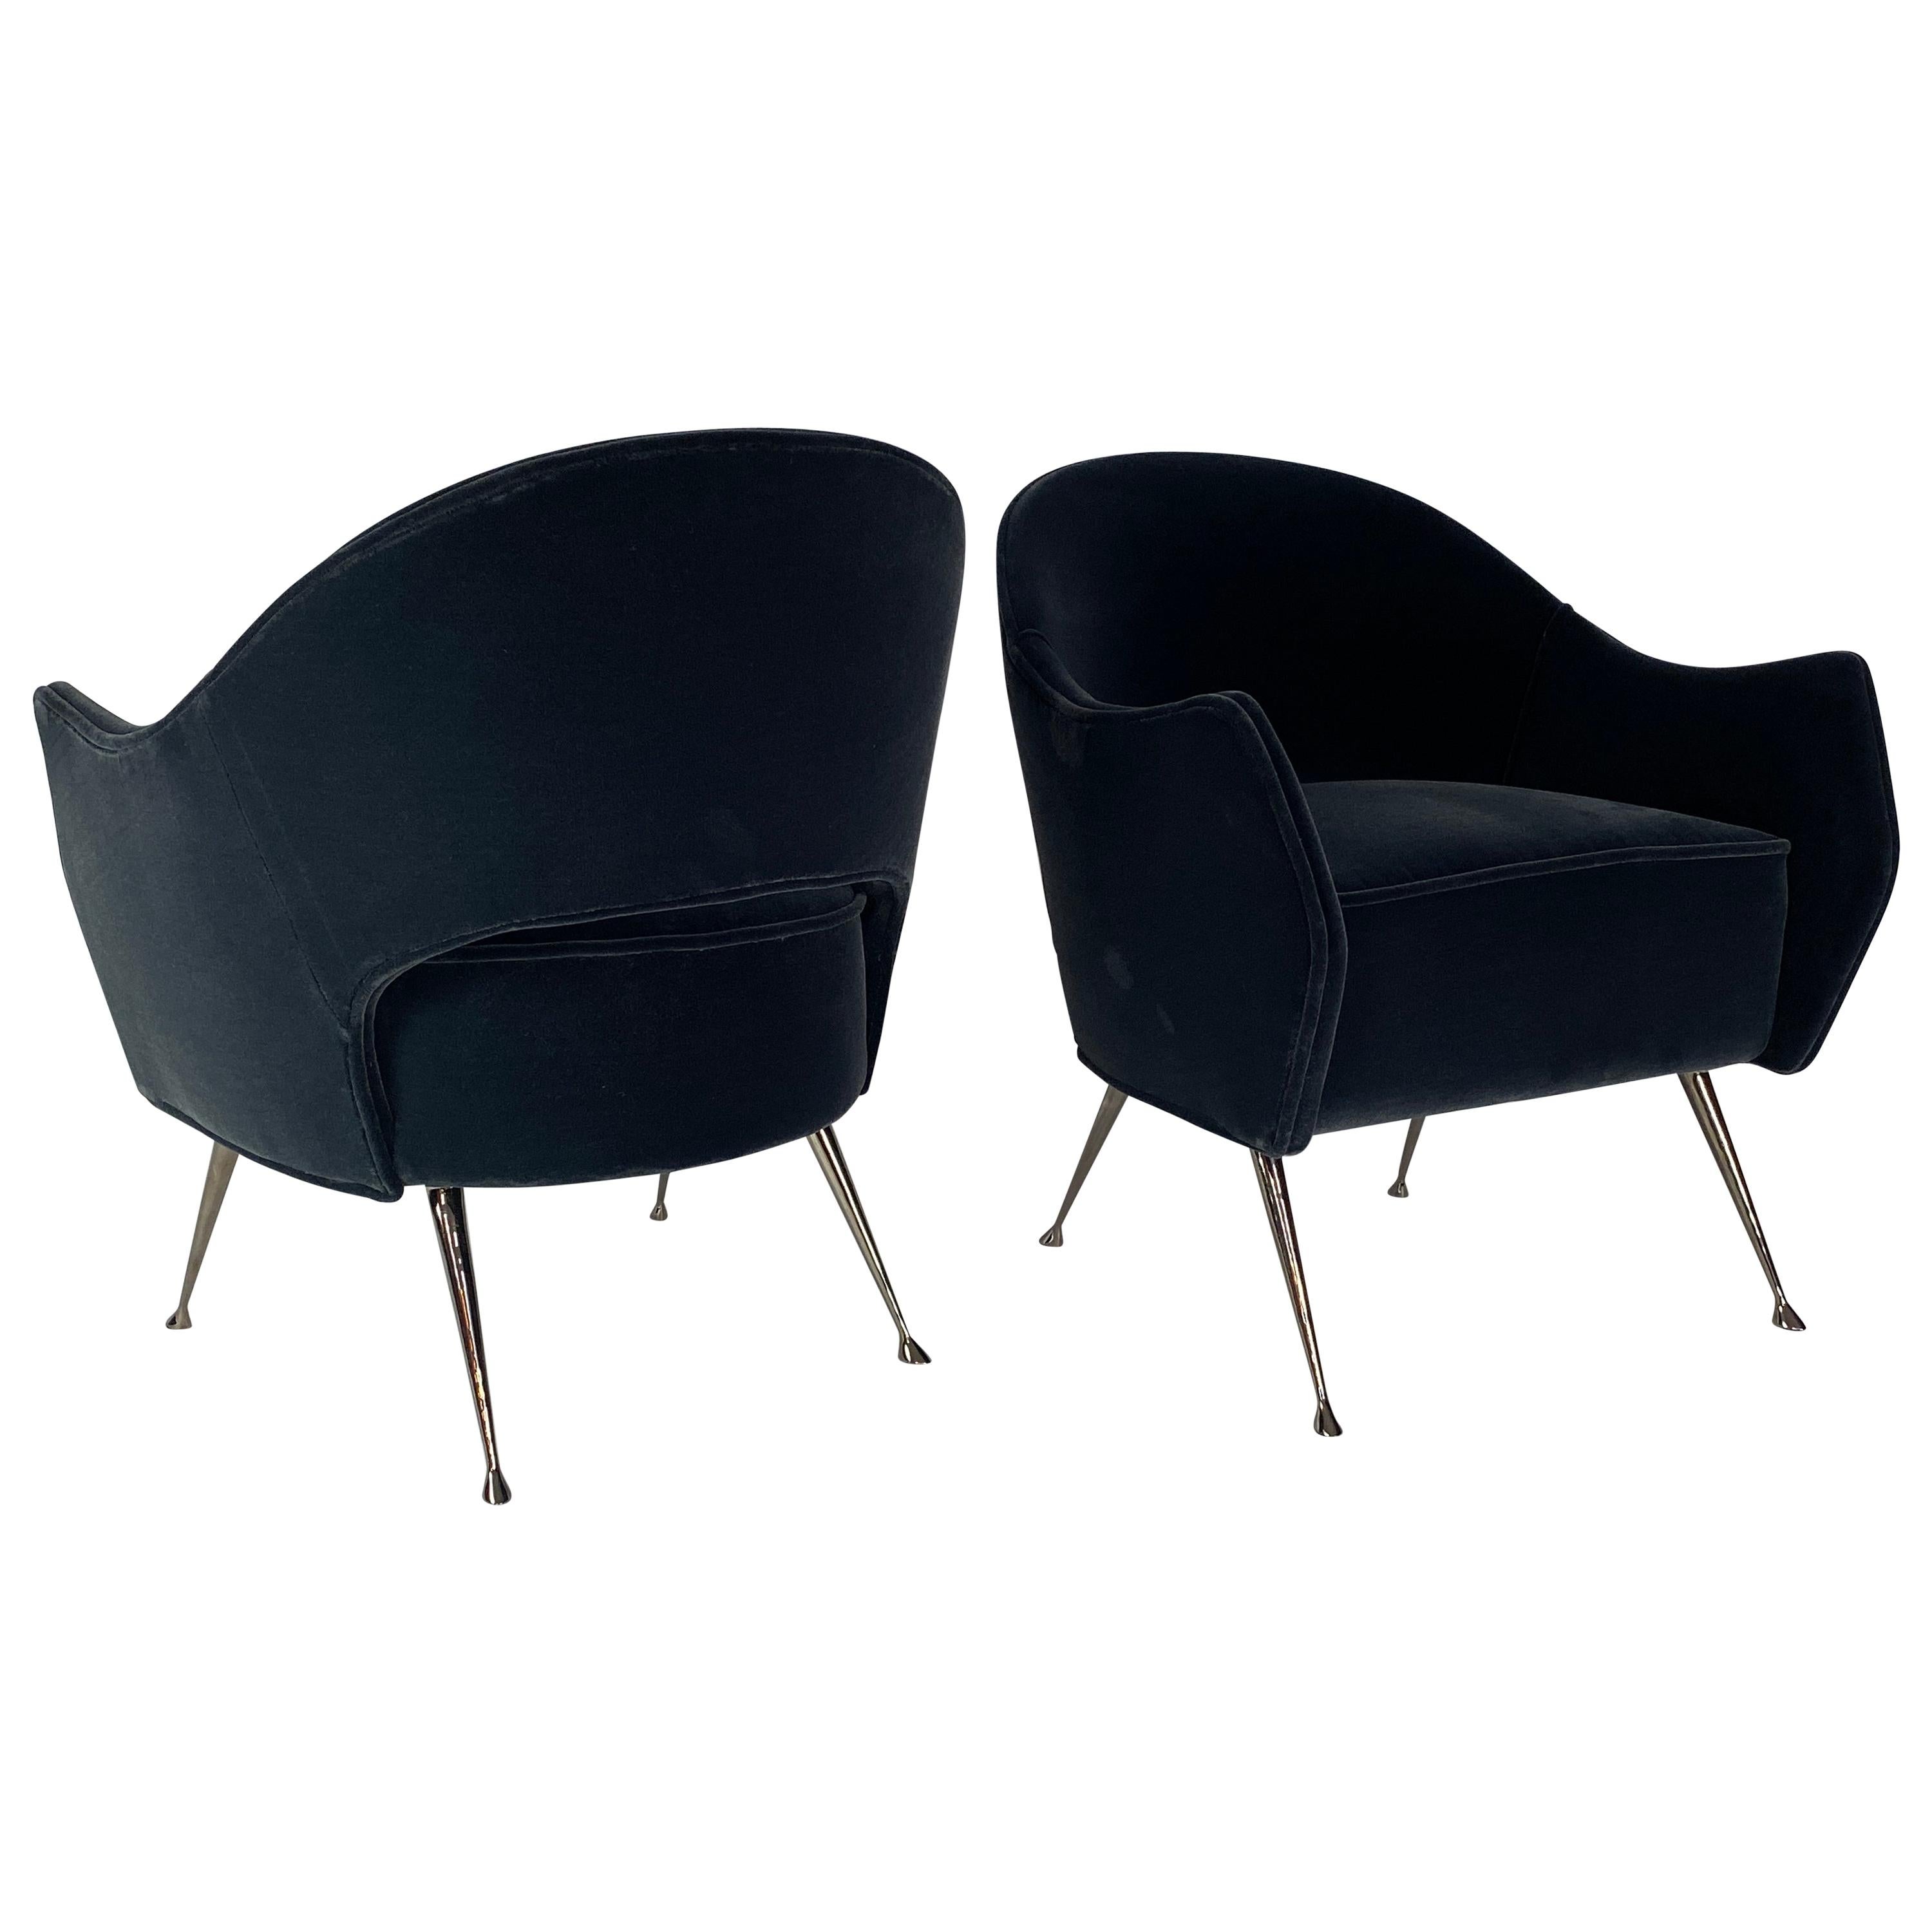 Pair of Briance Chairs, Black Nickel by Bourgeois Boheme Atelier